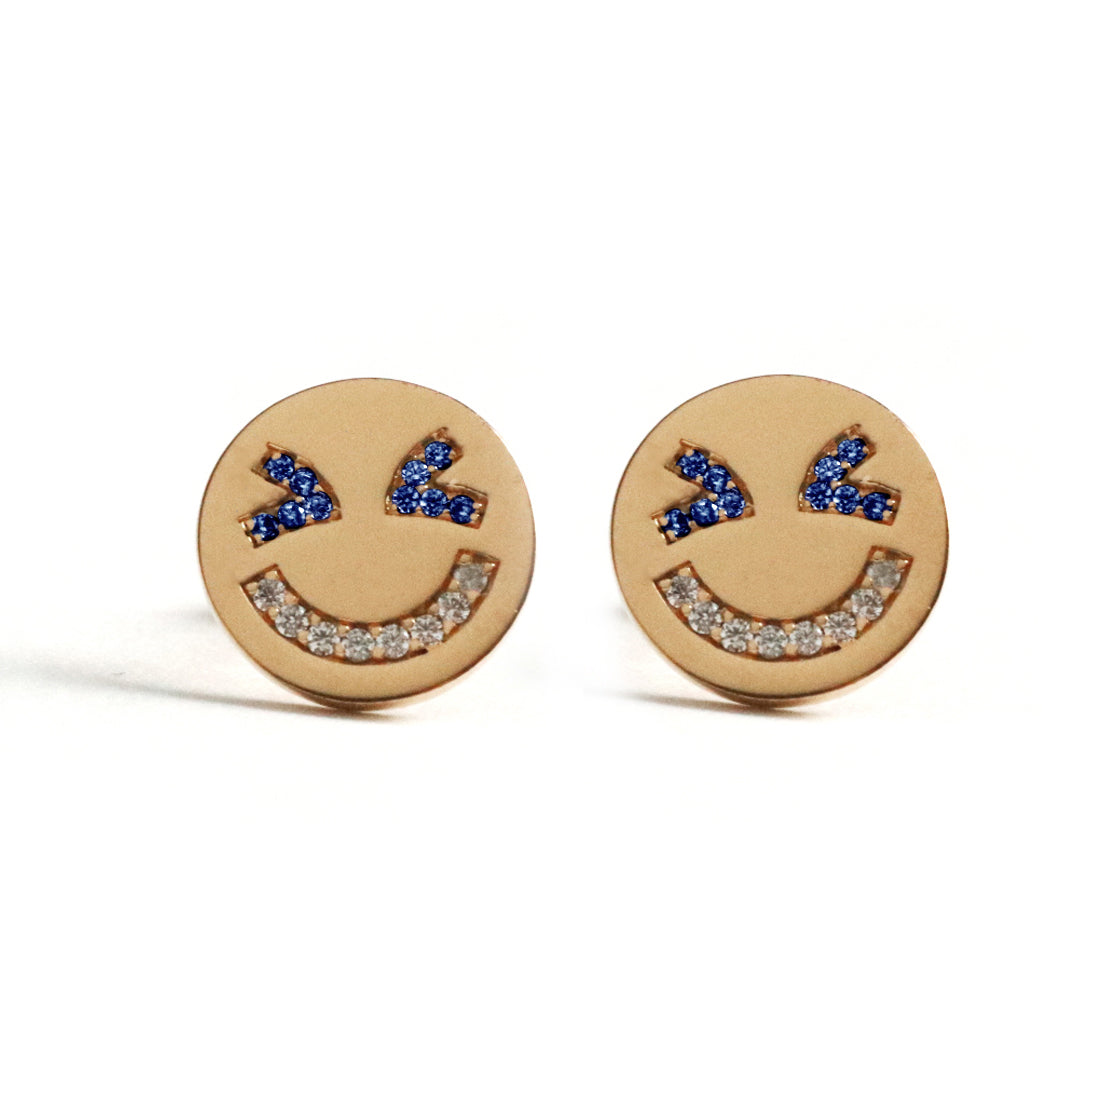 Laughing Face Earrings (Blue)